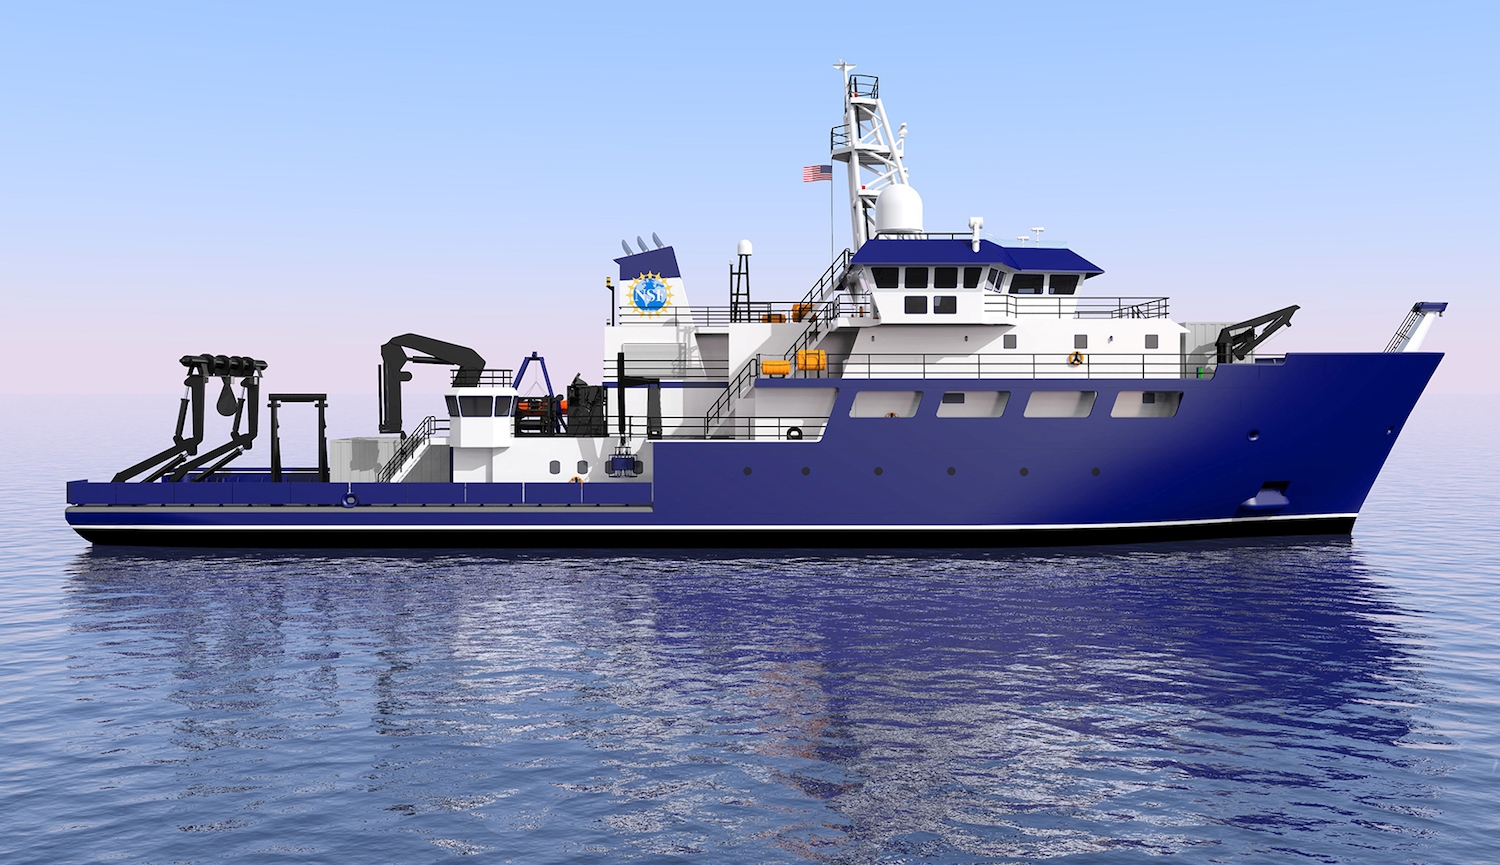 University of Rhode Island to operate NSF research ship - Baird 